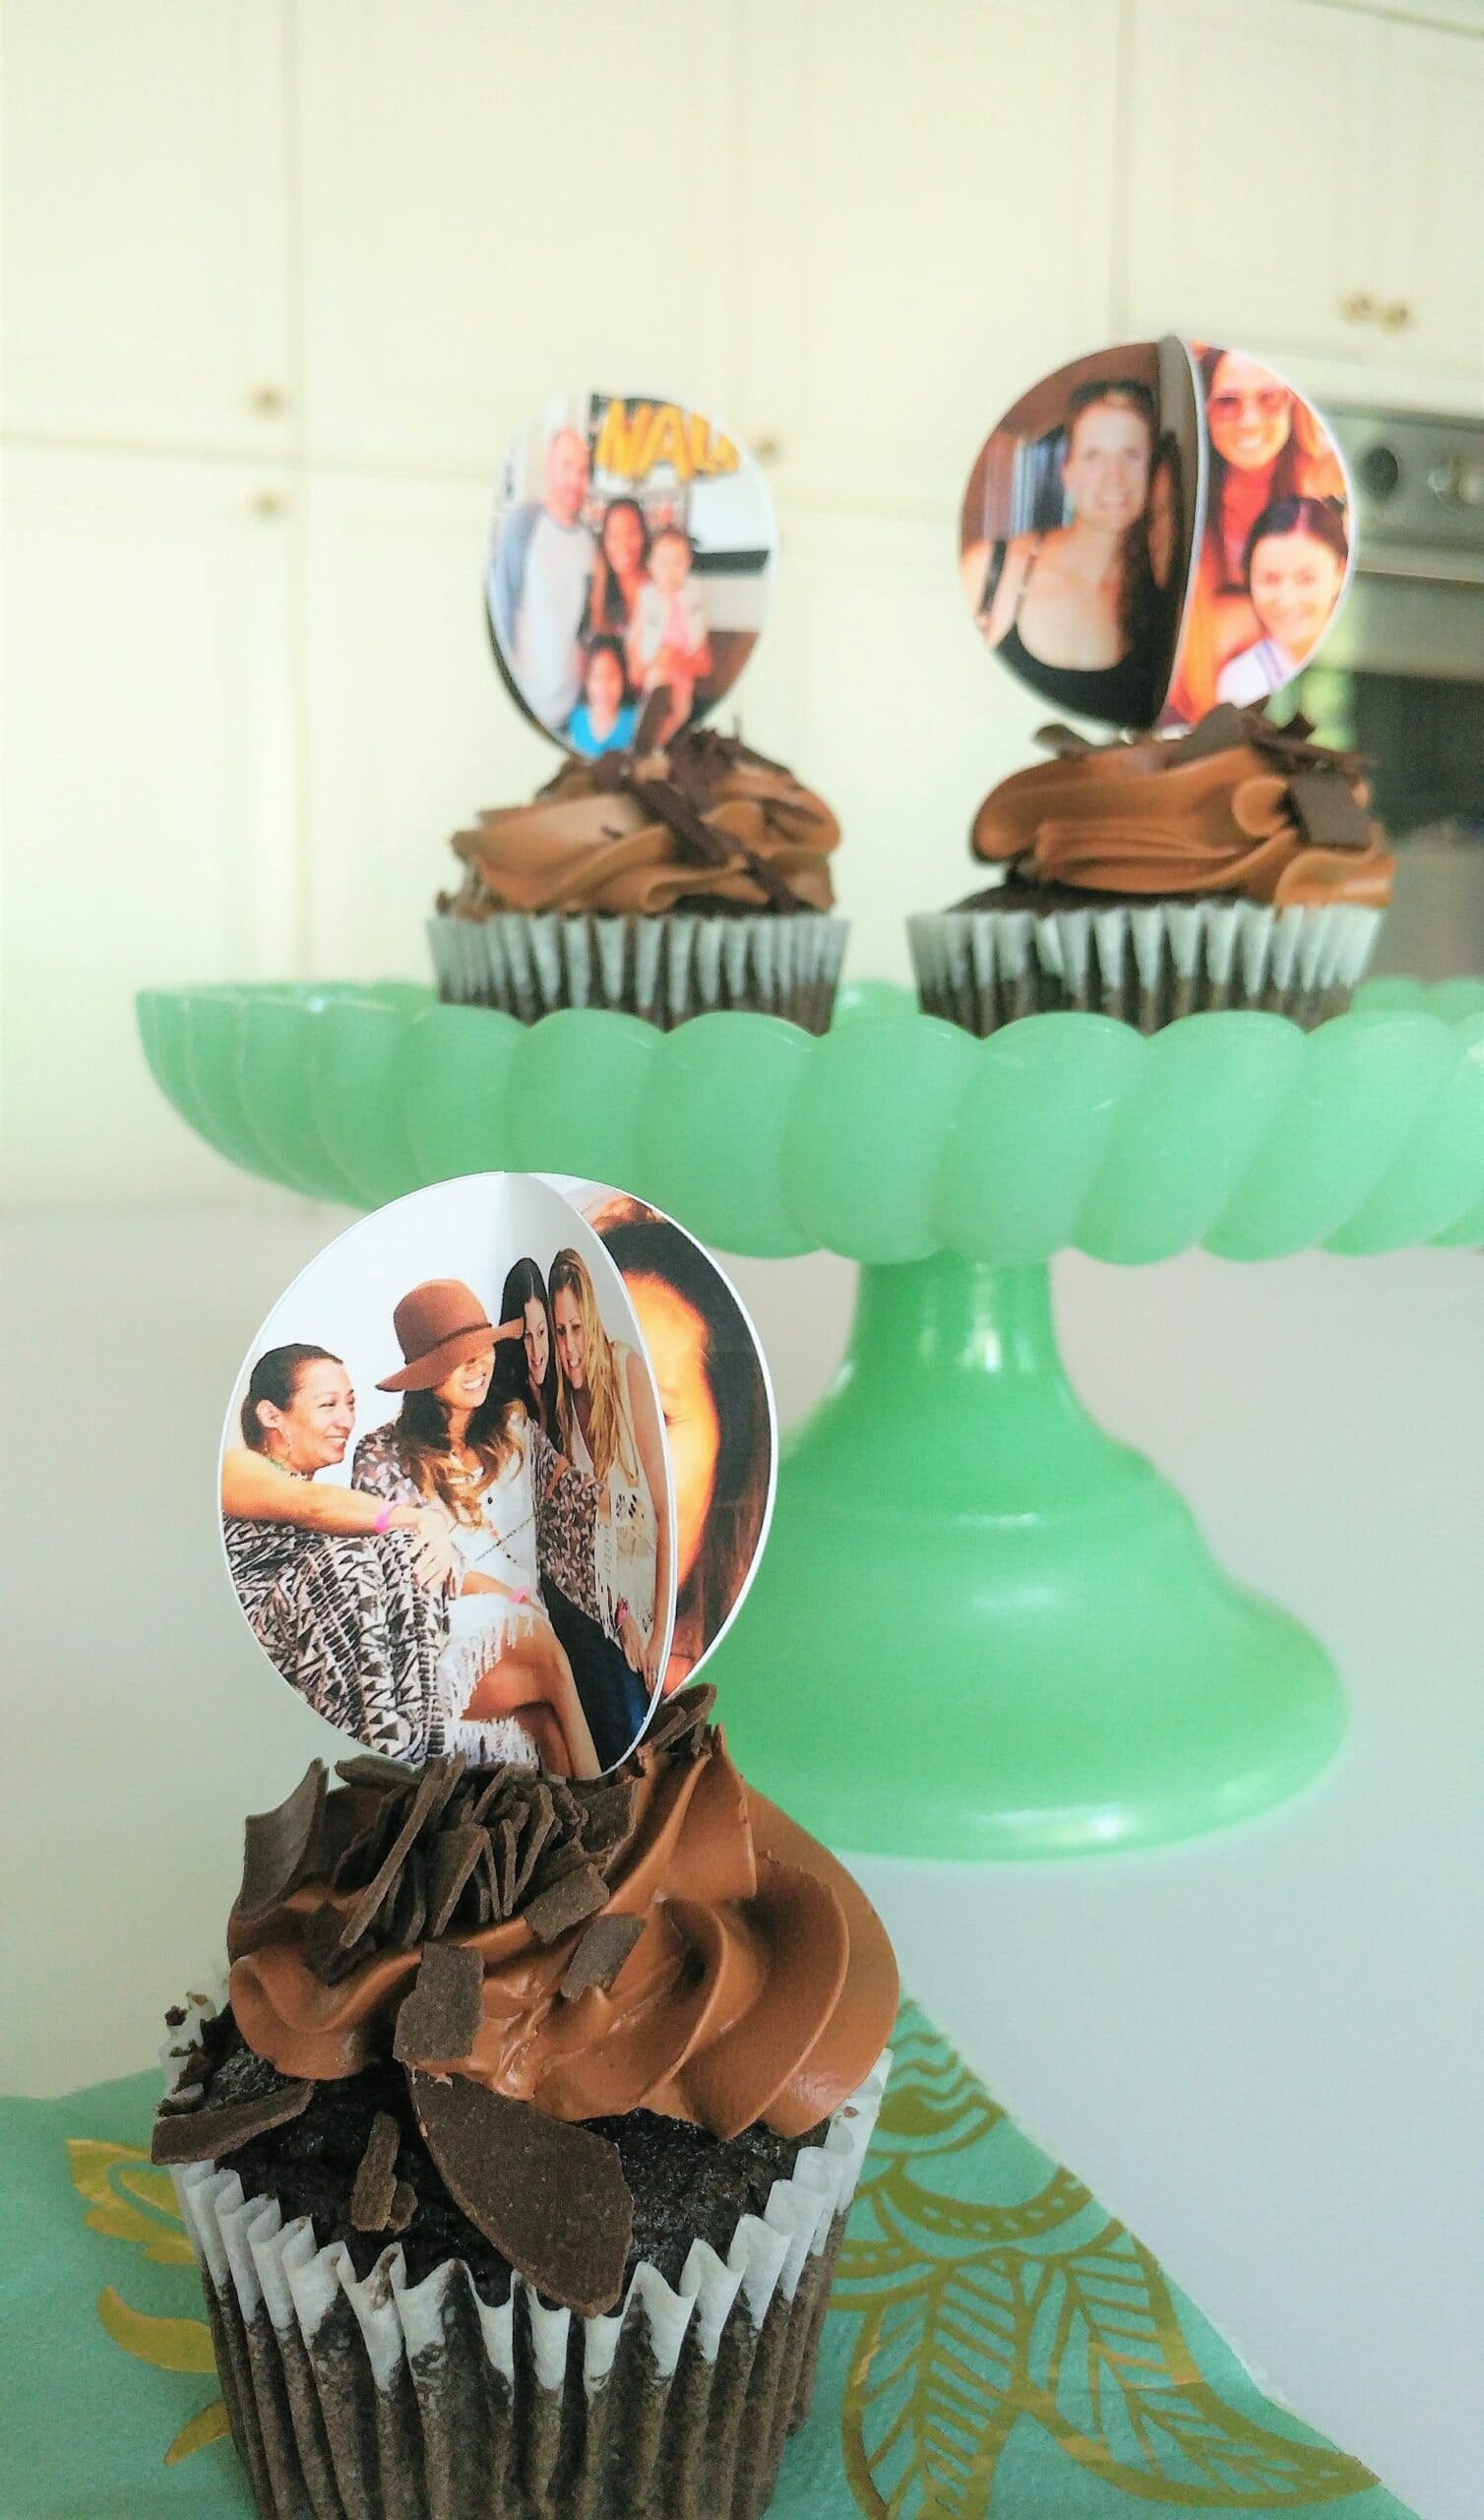 Photo Cupcake Toppers